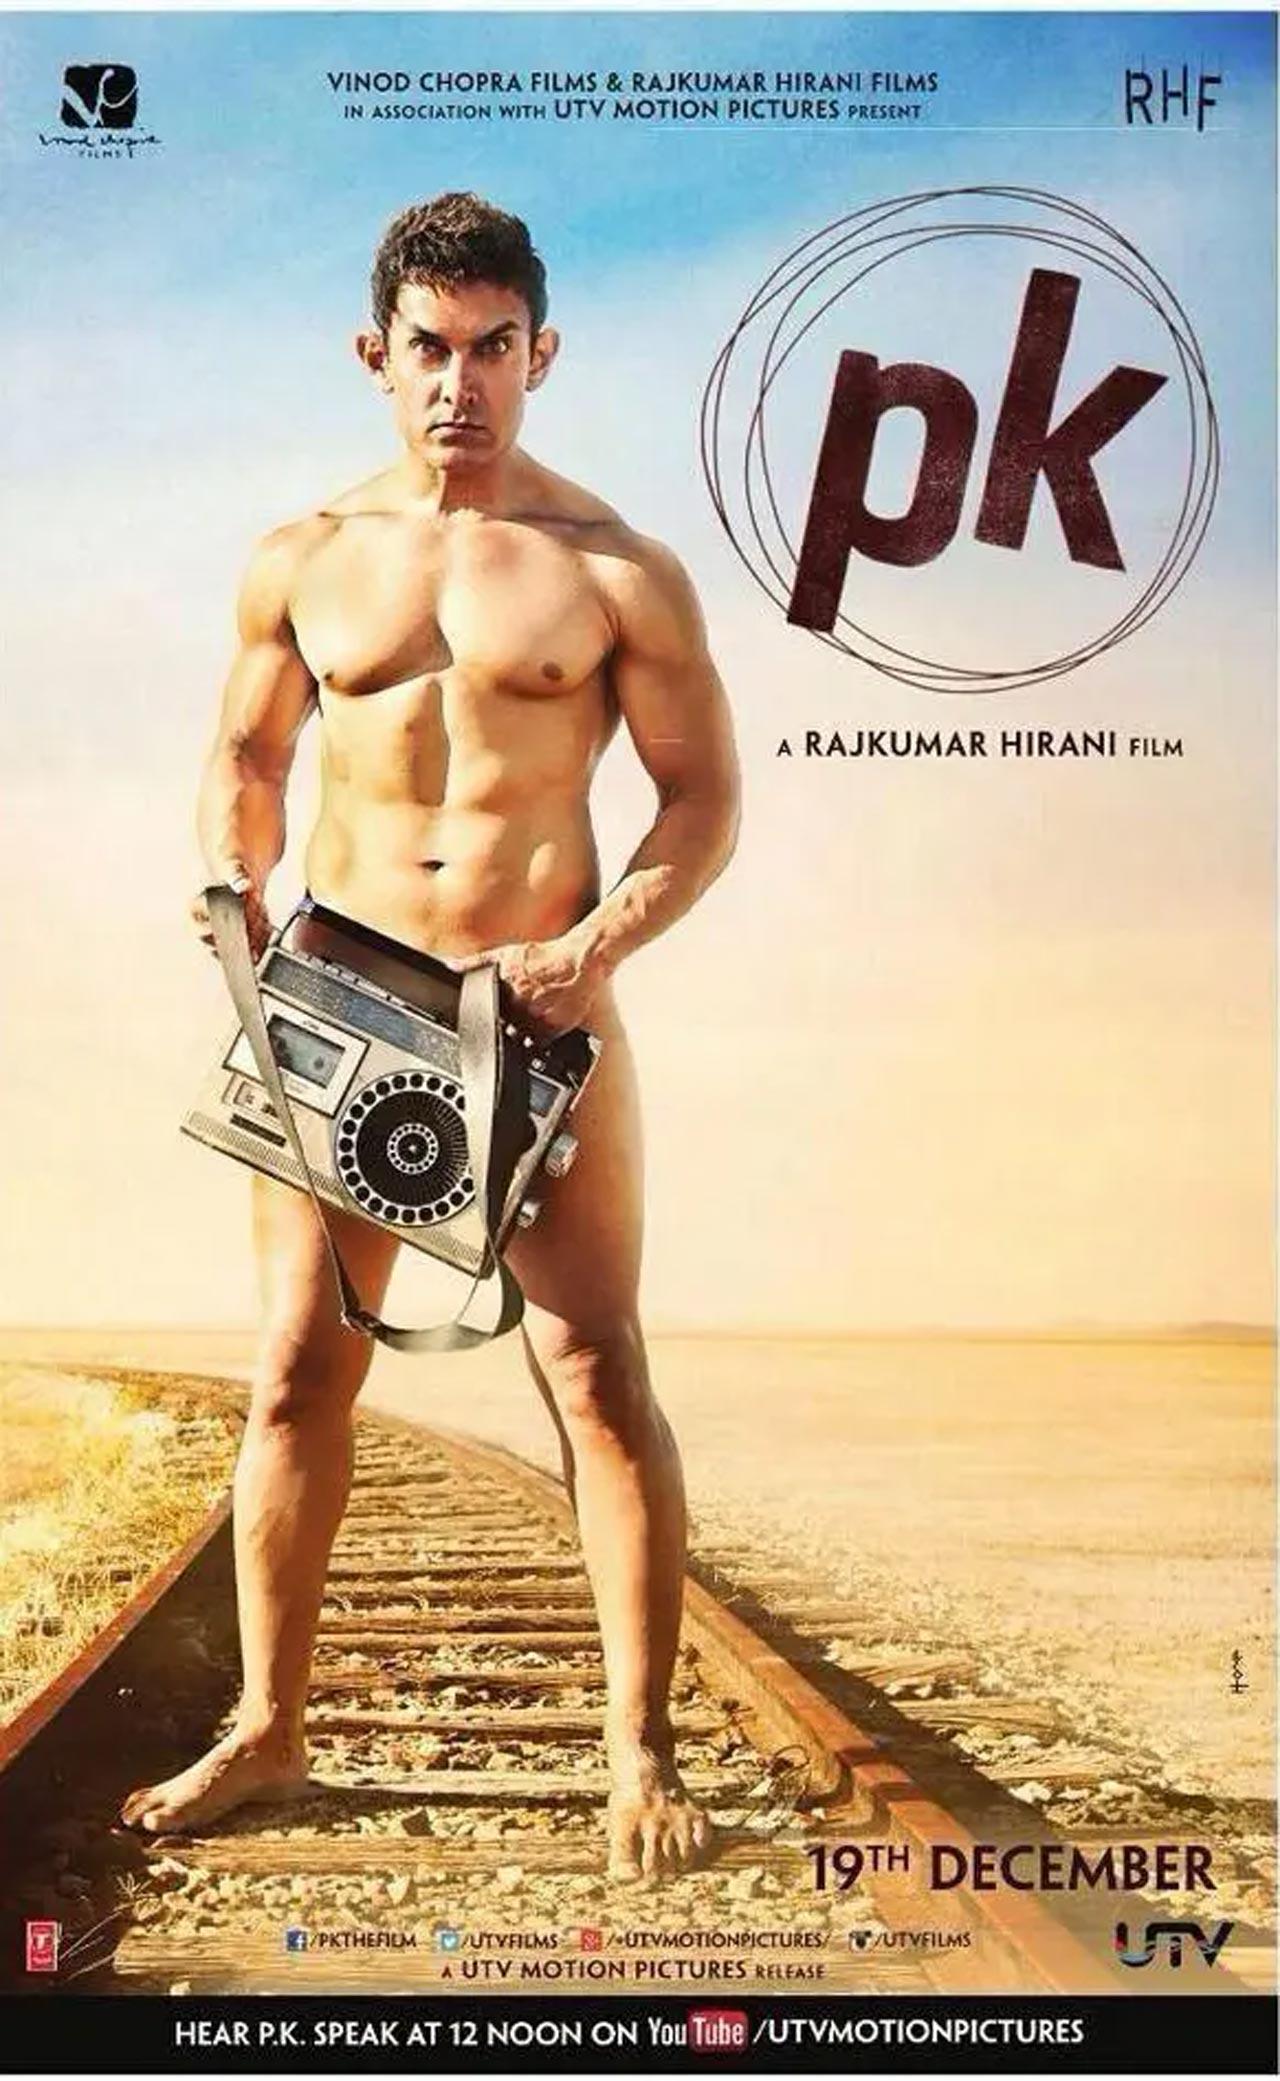 Aamir Khan
Aamir Khan created mass hysteria around the movie 'PK' when he appeared 'almost nude' on the poster of the film. In the photo, Aamir had nothing on him but a radio in hand. Some loved it, some didn't. Nevertheless, the movie did great business at the box office (PK poster)